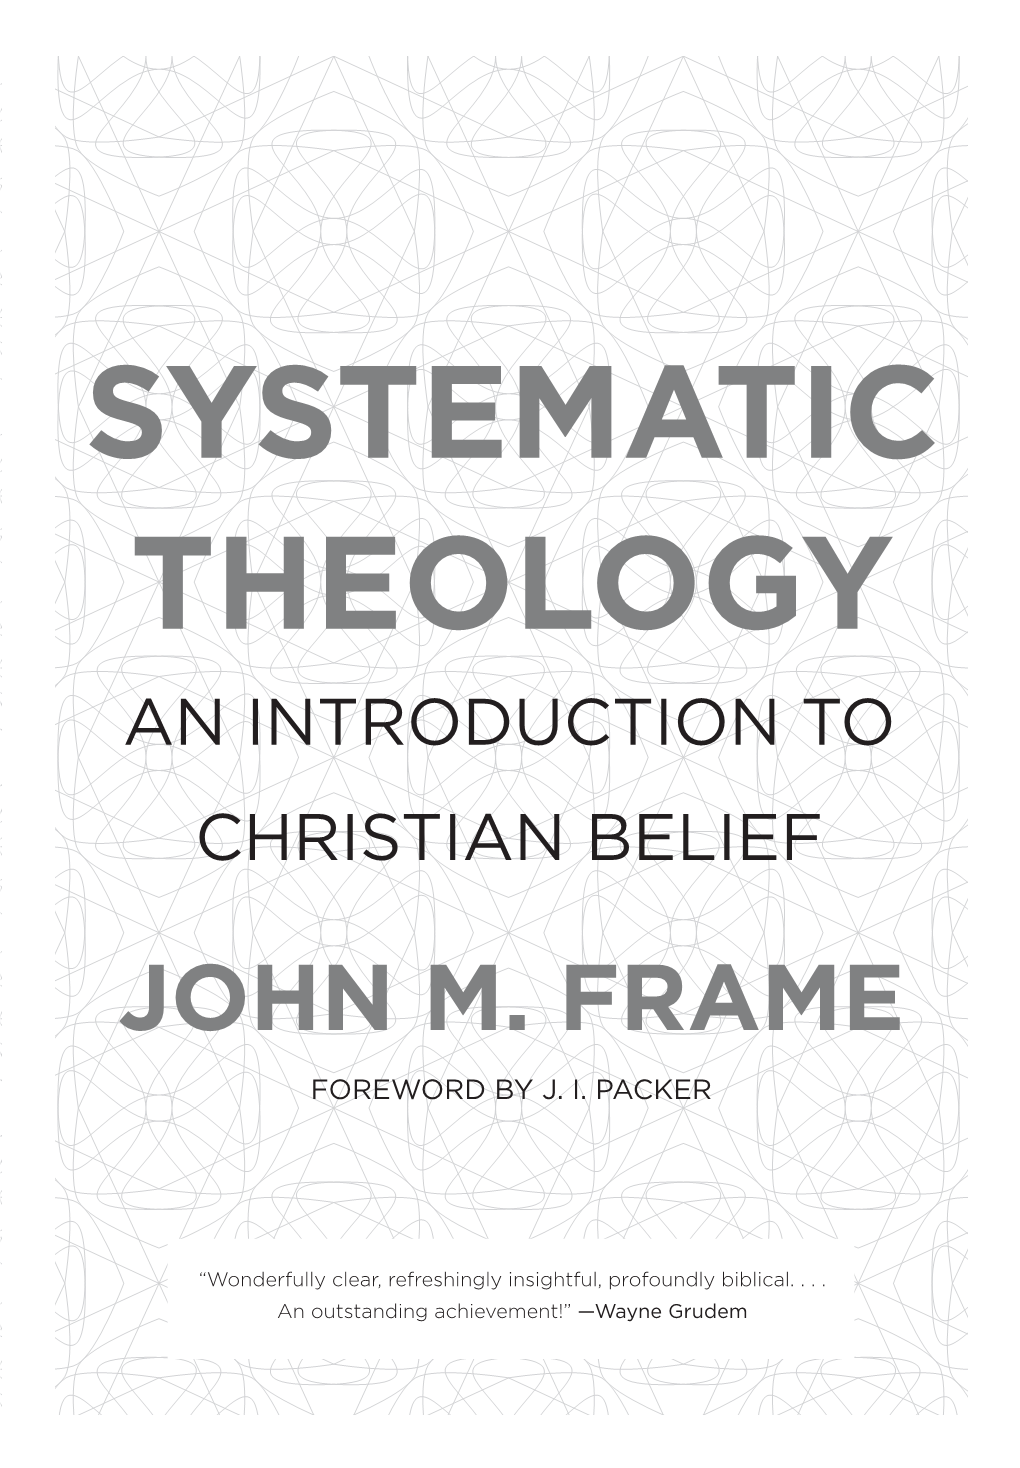 Systematic Theology by John Frame